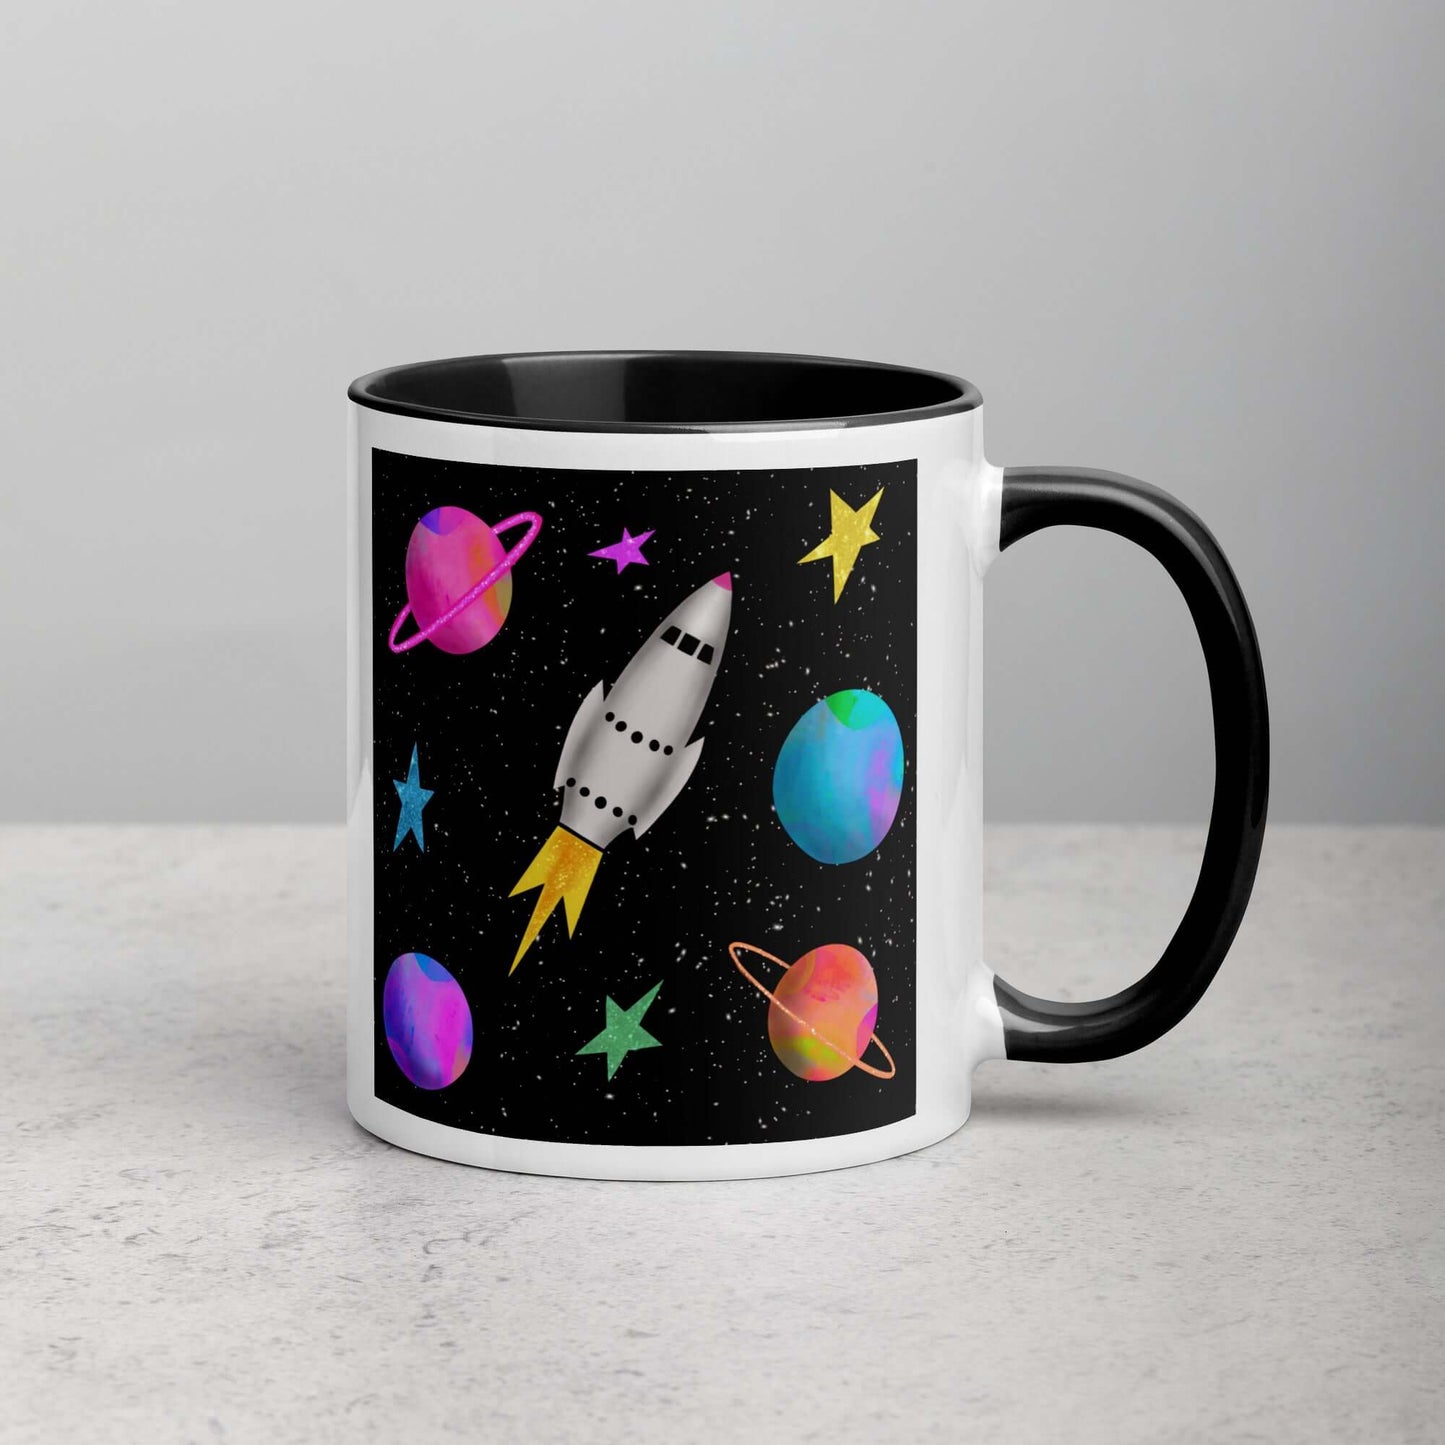 Whimsical Space Rocket with Colorful Planets and Stars on Black Background “Space Rockets” Mug with Black Color Inside Right Handed Front View